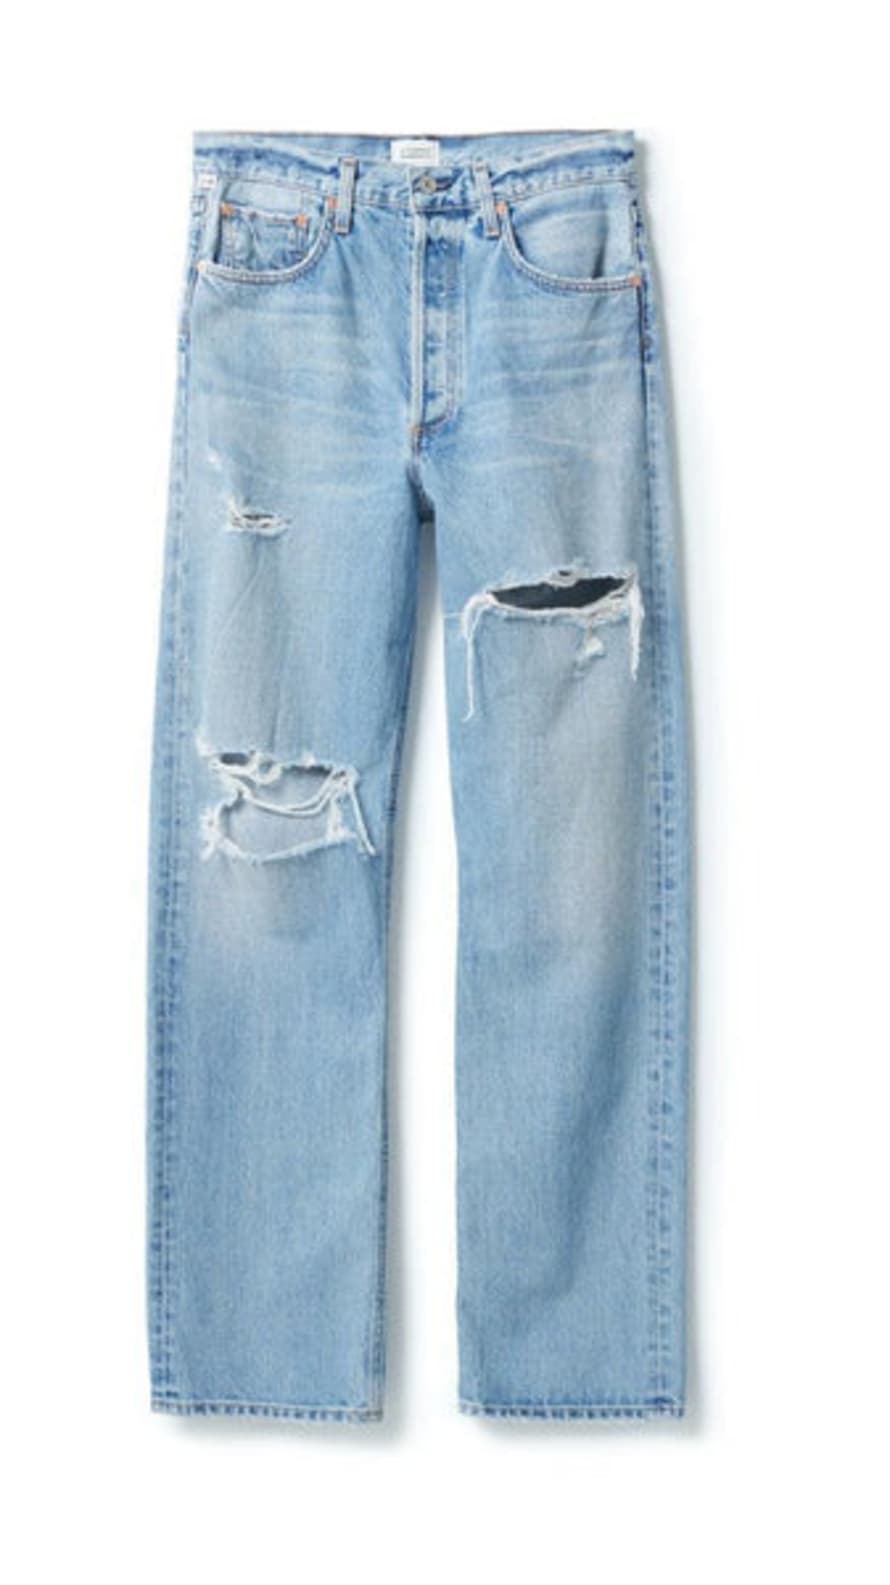 CITIZENS OF HUMANITY Eva Chamberlain Relaxed Distressed Jeans